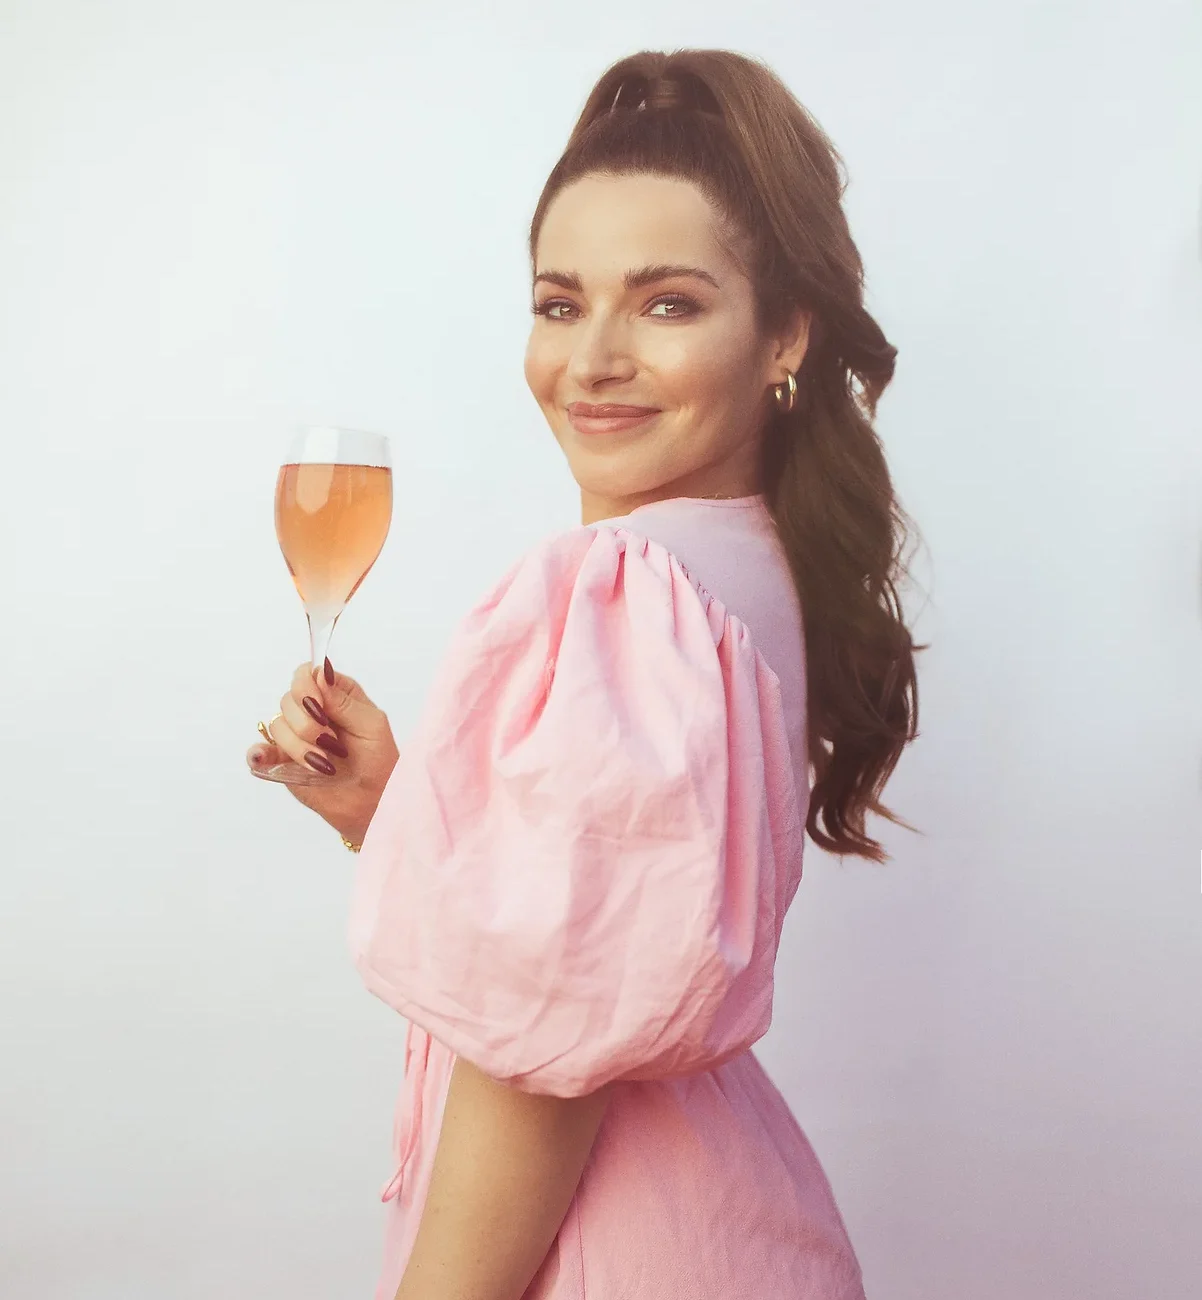 A woman in pink holding a glass of wine.